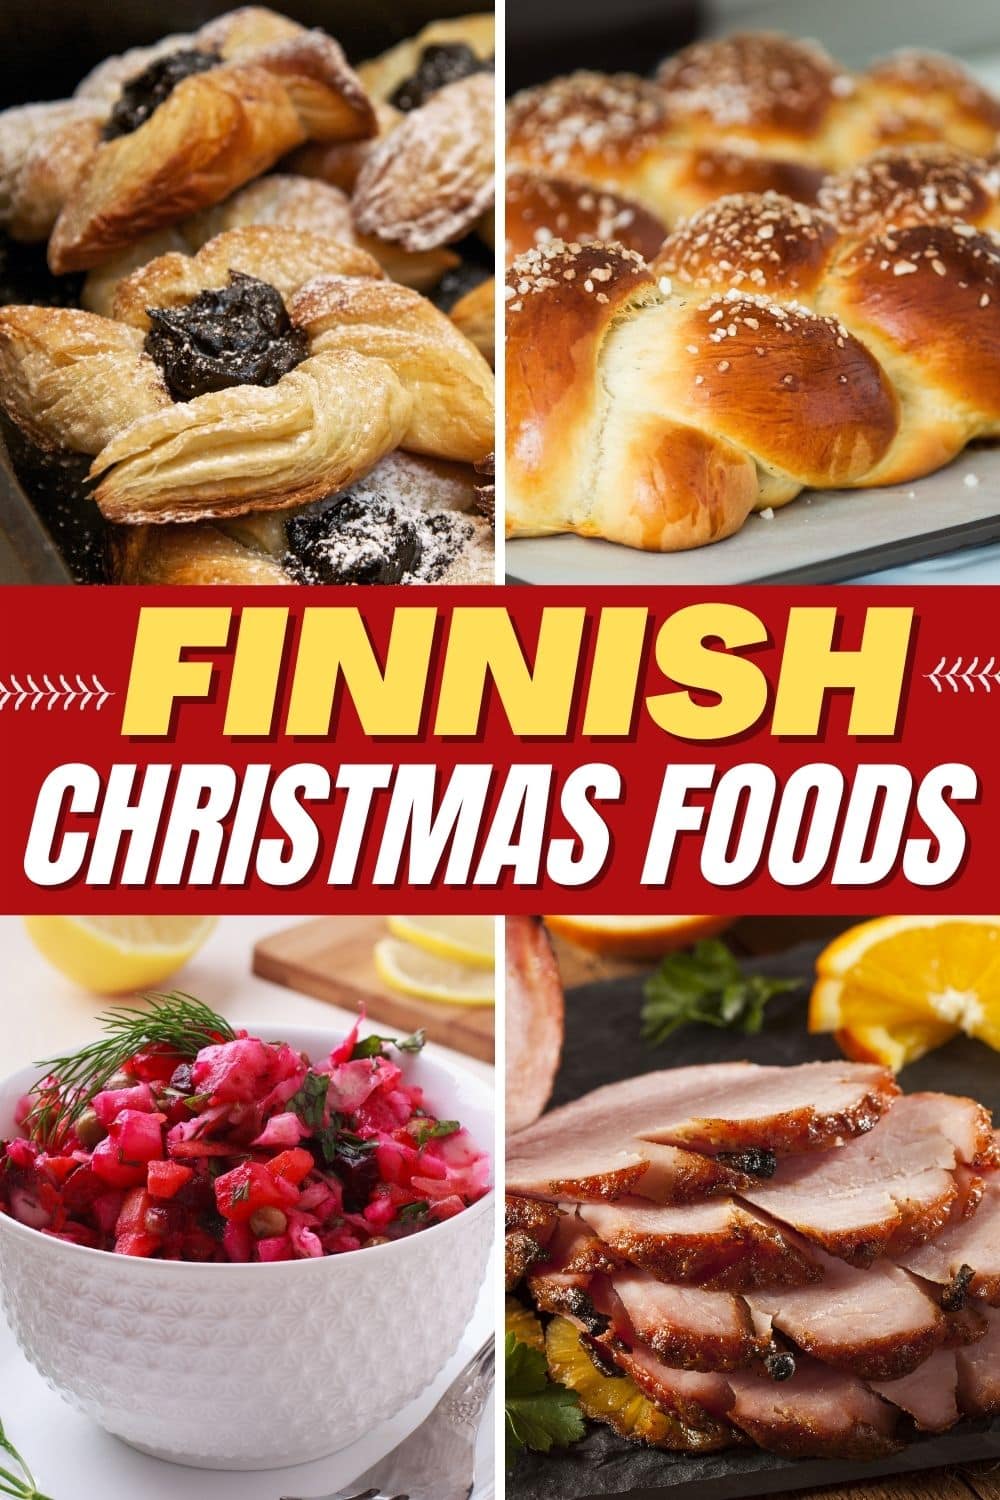 10 Traditional Finnish Christmas Foods - Insanely Good